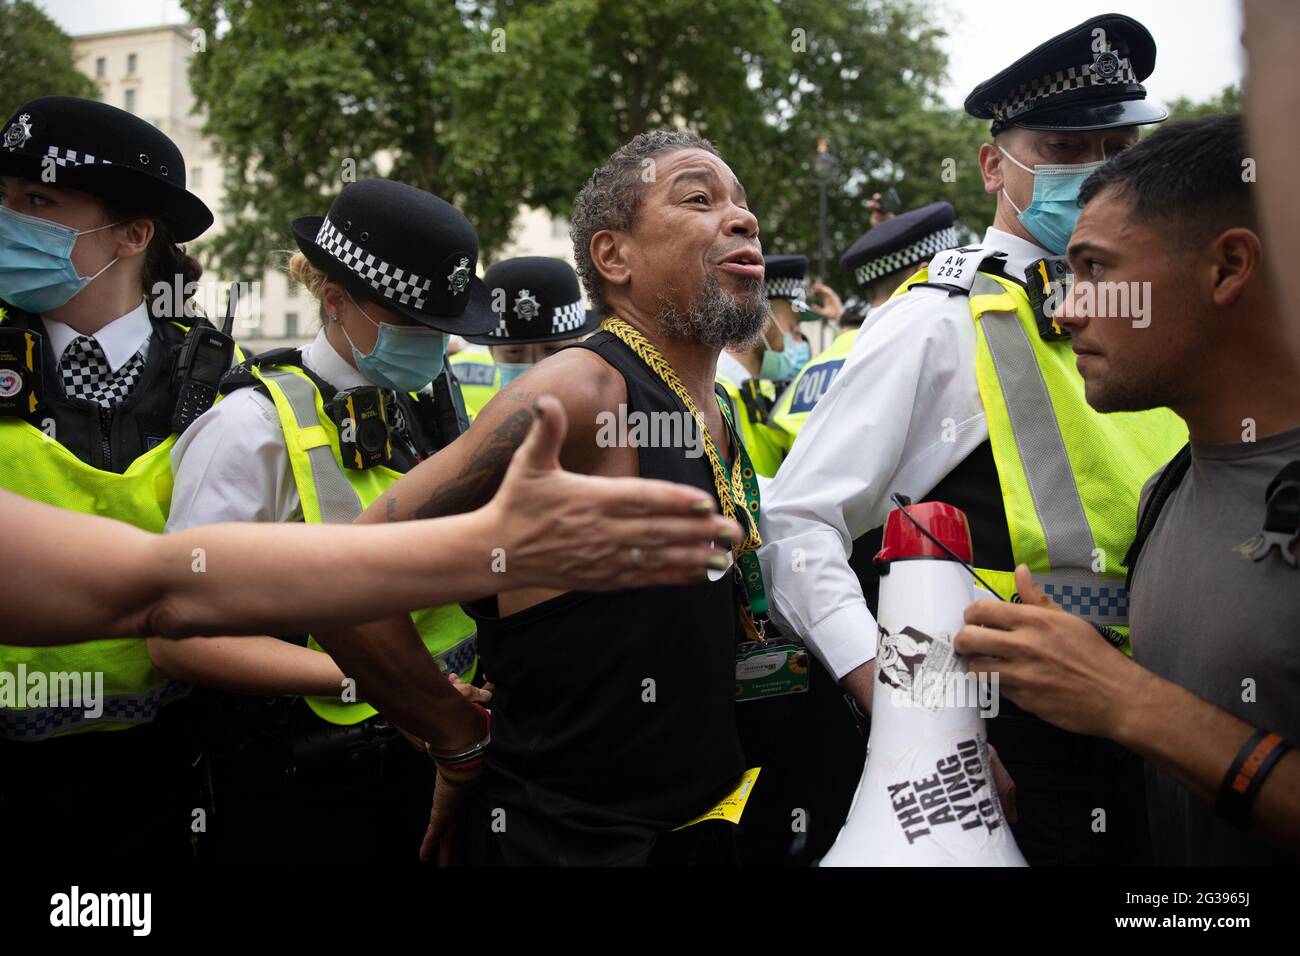 London, UK. 14th June 2021. An anti-vaxx protester is arrested outside Downing Street. Yuen Ching Ng/Alamy Live News. Stock Photo